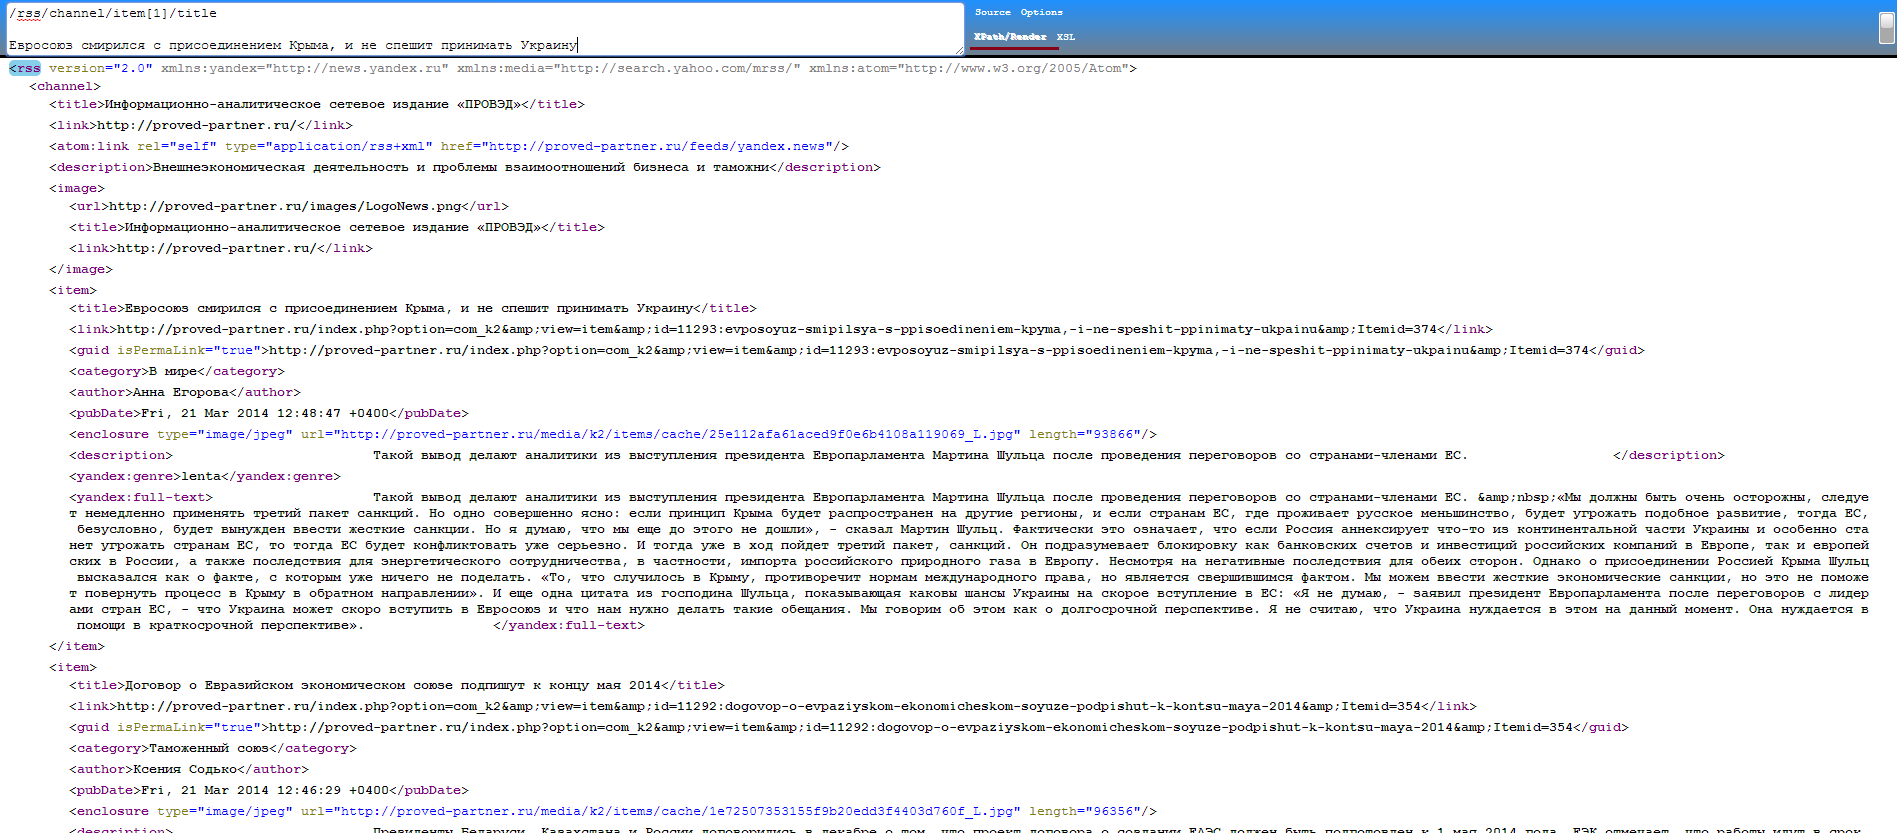 xml-tree-title-first-line.png